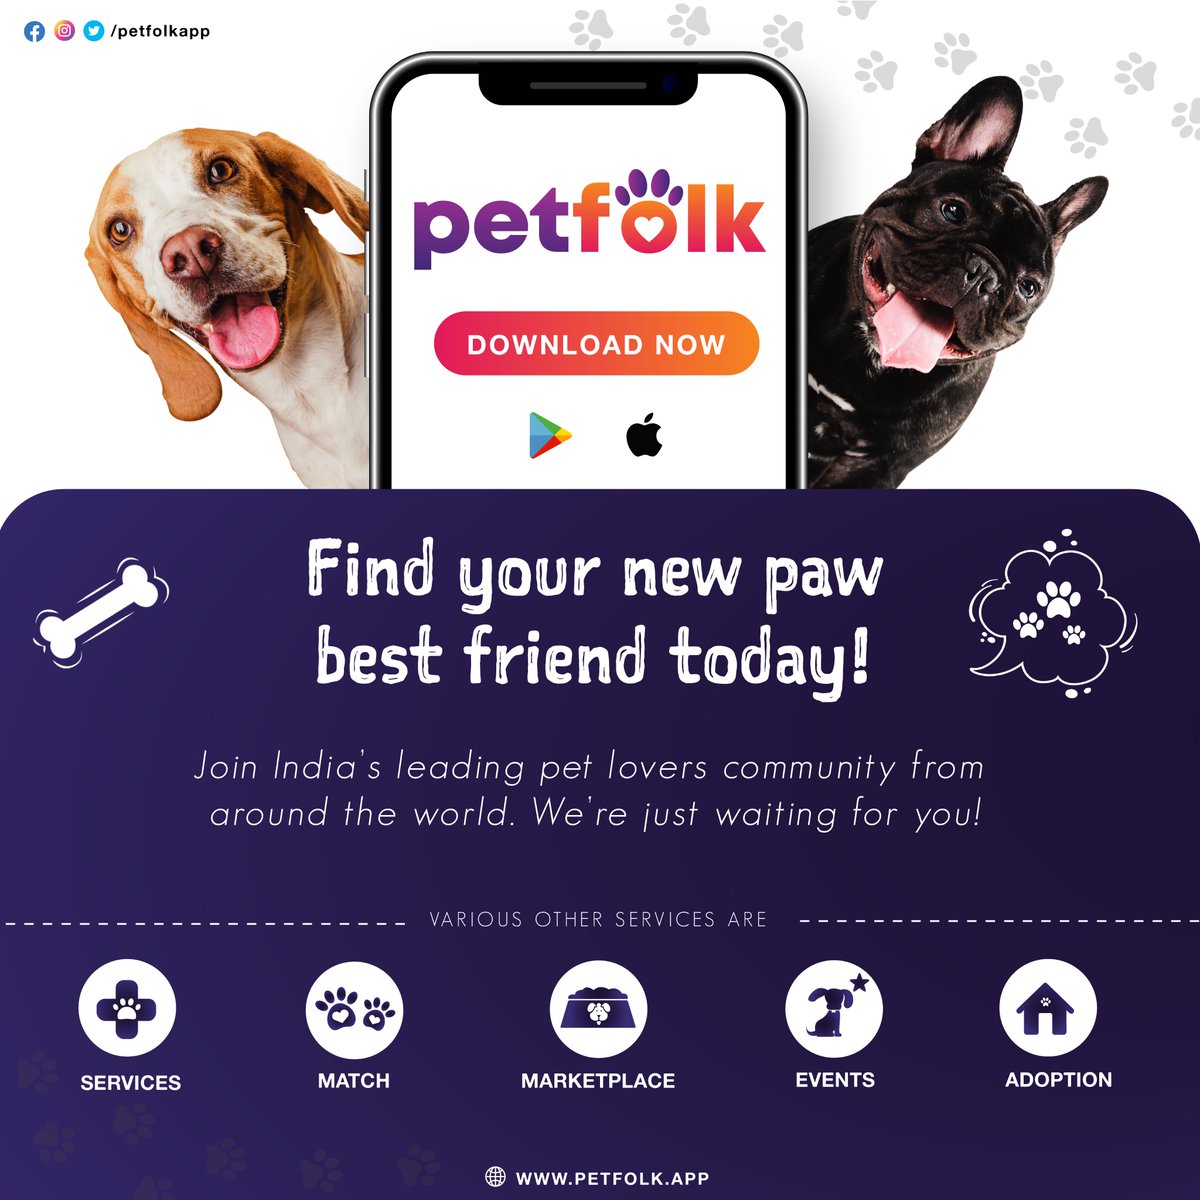 What are you still waiting for? DOWNLOAD NOW, create your pet's profile and let your pet make a new friend today! 

#petparents #petlover #petgroomer #petparentcommunity #socialmediaapp #PetsOfIndia #PetCelebrities #petevents  #petcare  #dogparent #catparents #petfolkapp #petfolk